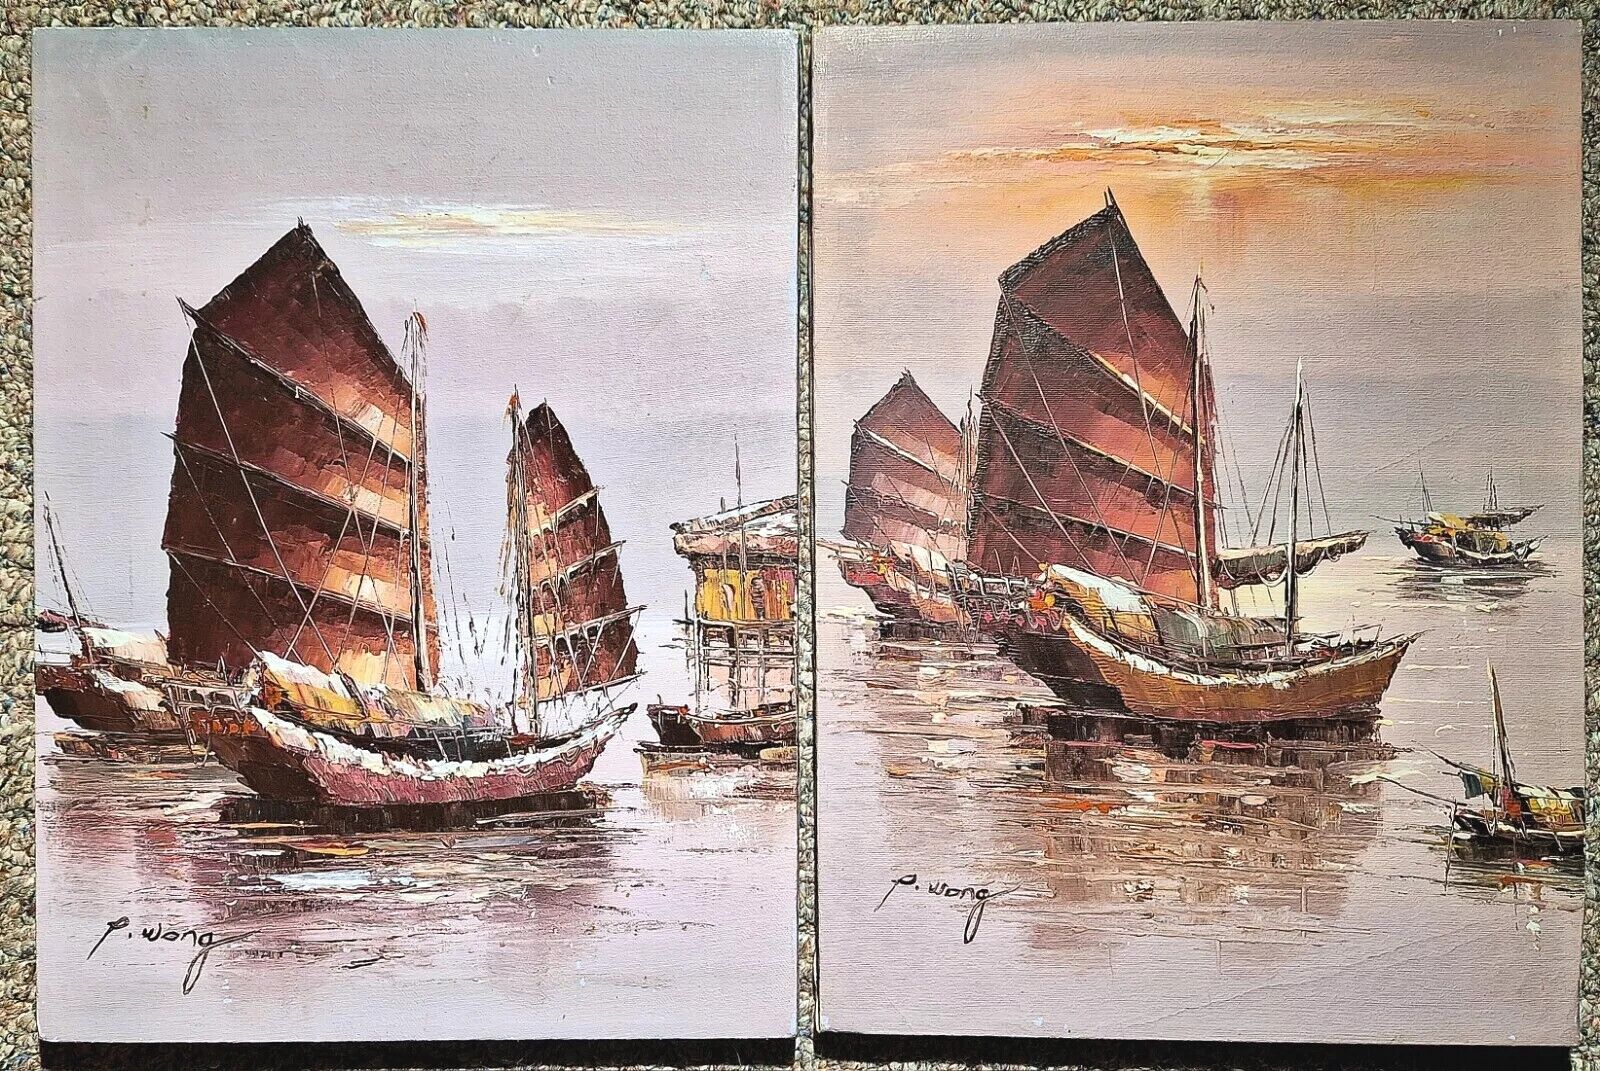 Set of 2 (two)Vintage Chinese Junk Boat P. WONG (PETER WONG) Oil on Canvas  Ship